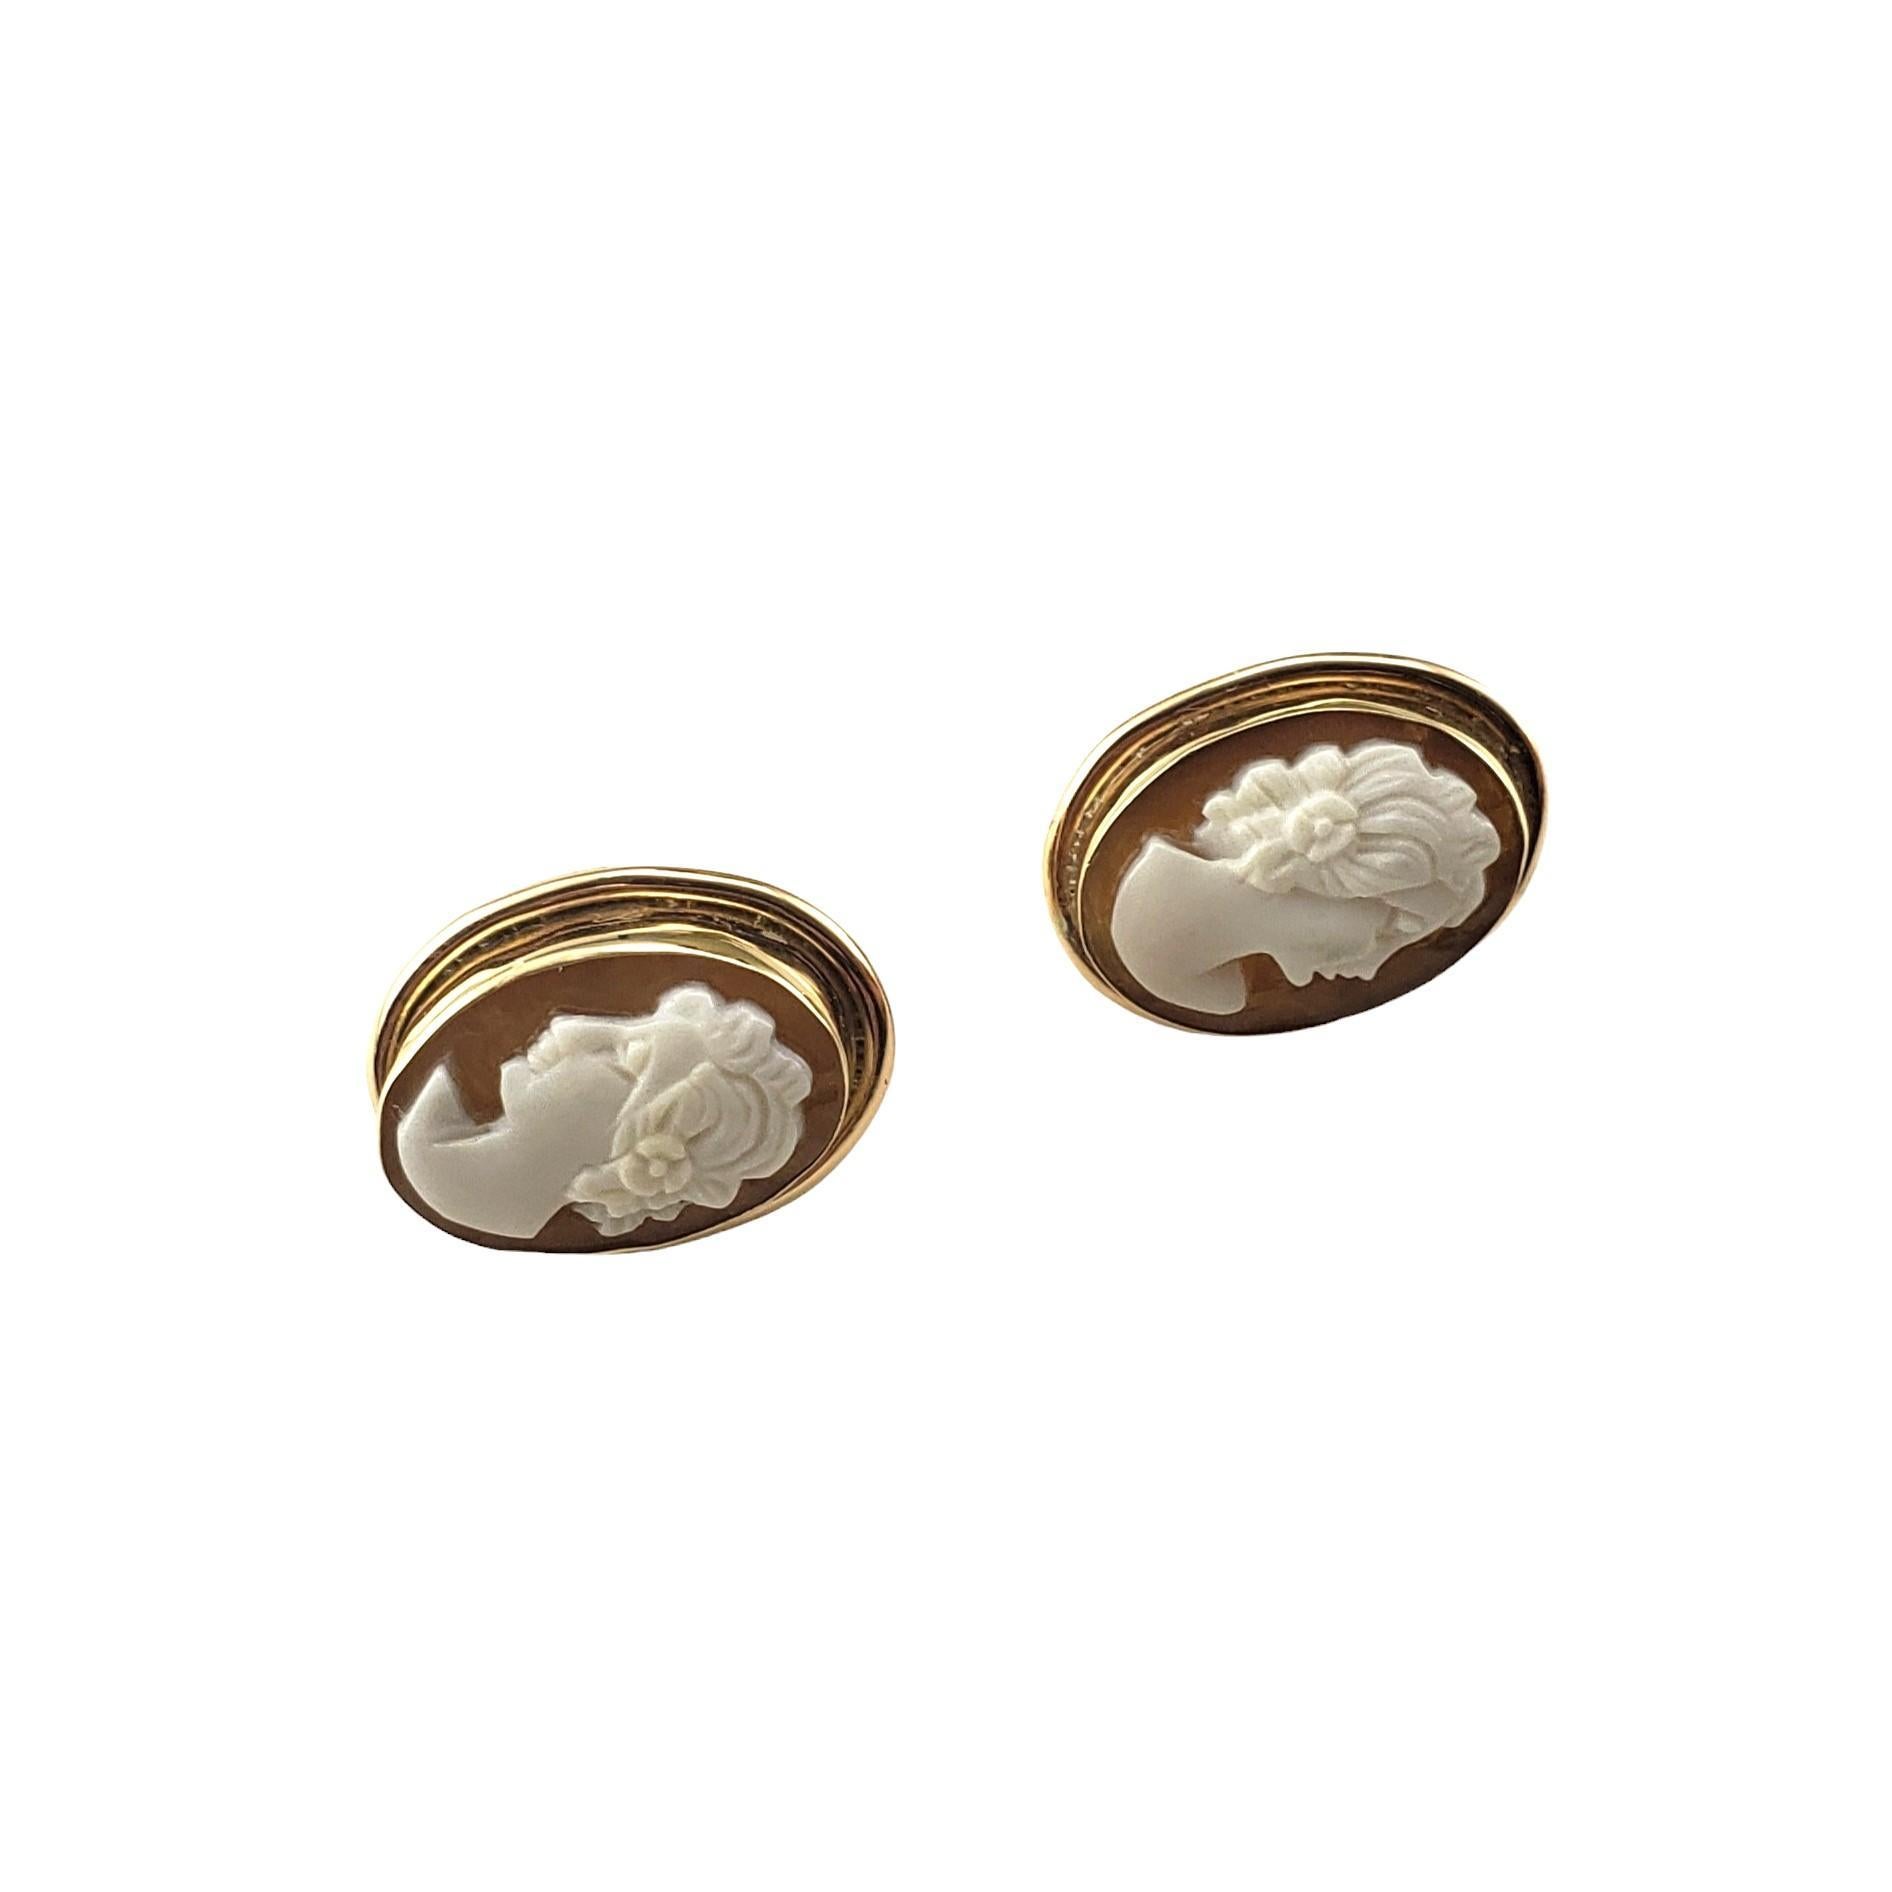 Vintage 14 Yellow Gold Cameo Earrings-

These elegant cameo earrings feature a lovely lady in profile set in classic 14K yellow gold.  Push back closures.

Size:  16.7 mm x 13 mm

Tested 14K gold.

Weight: 4.4 gr./ dwt.

Very good condition,